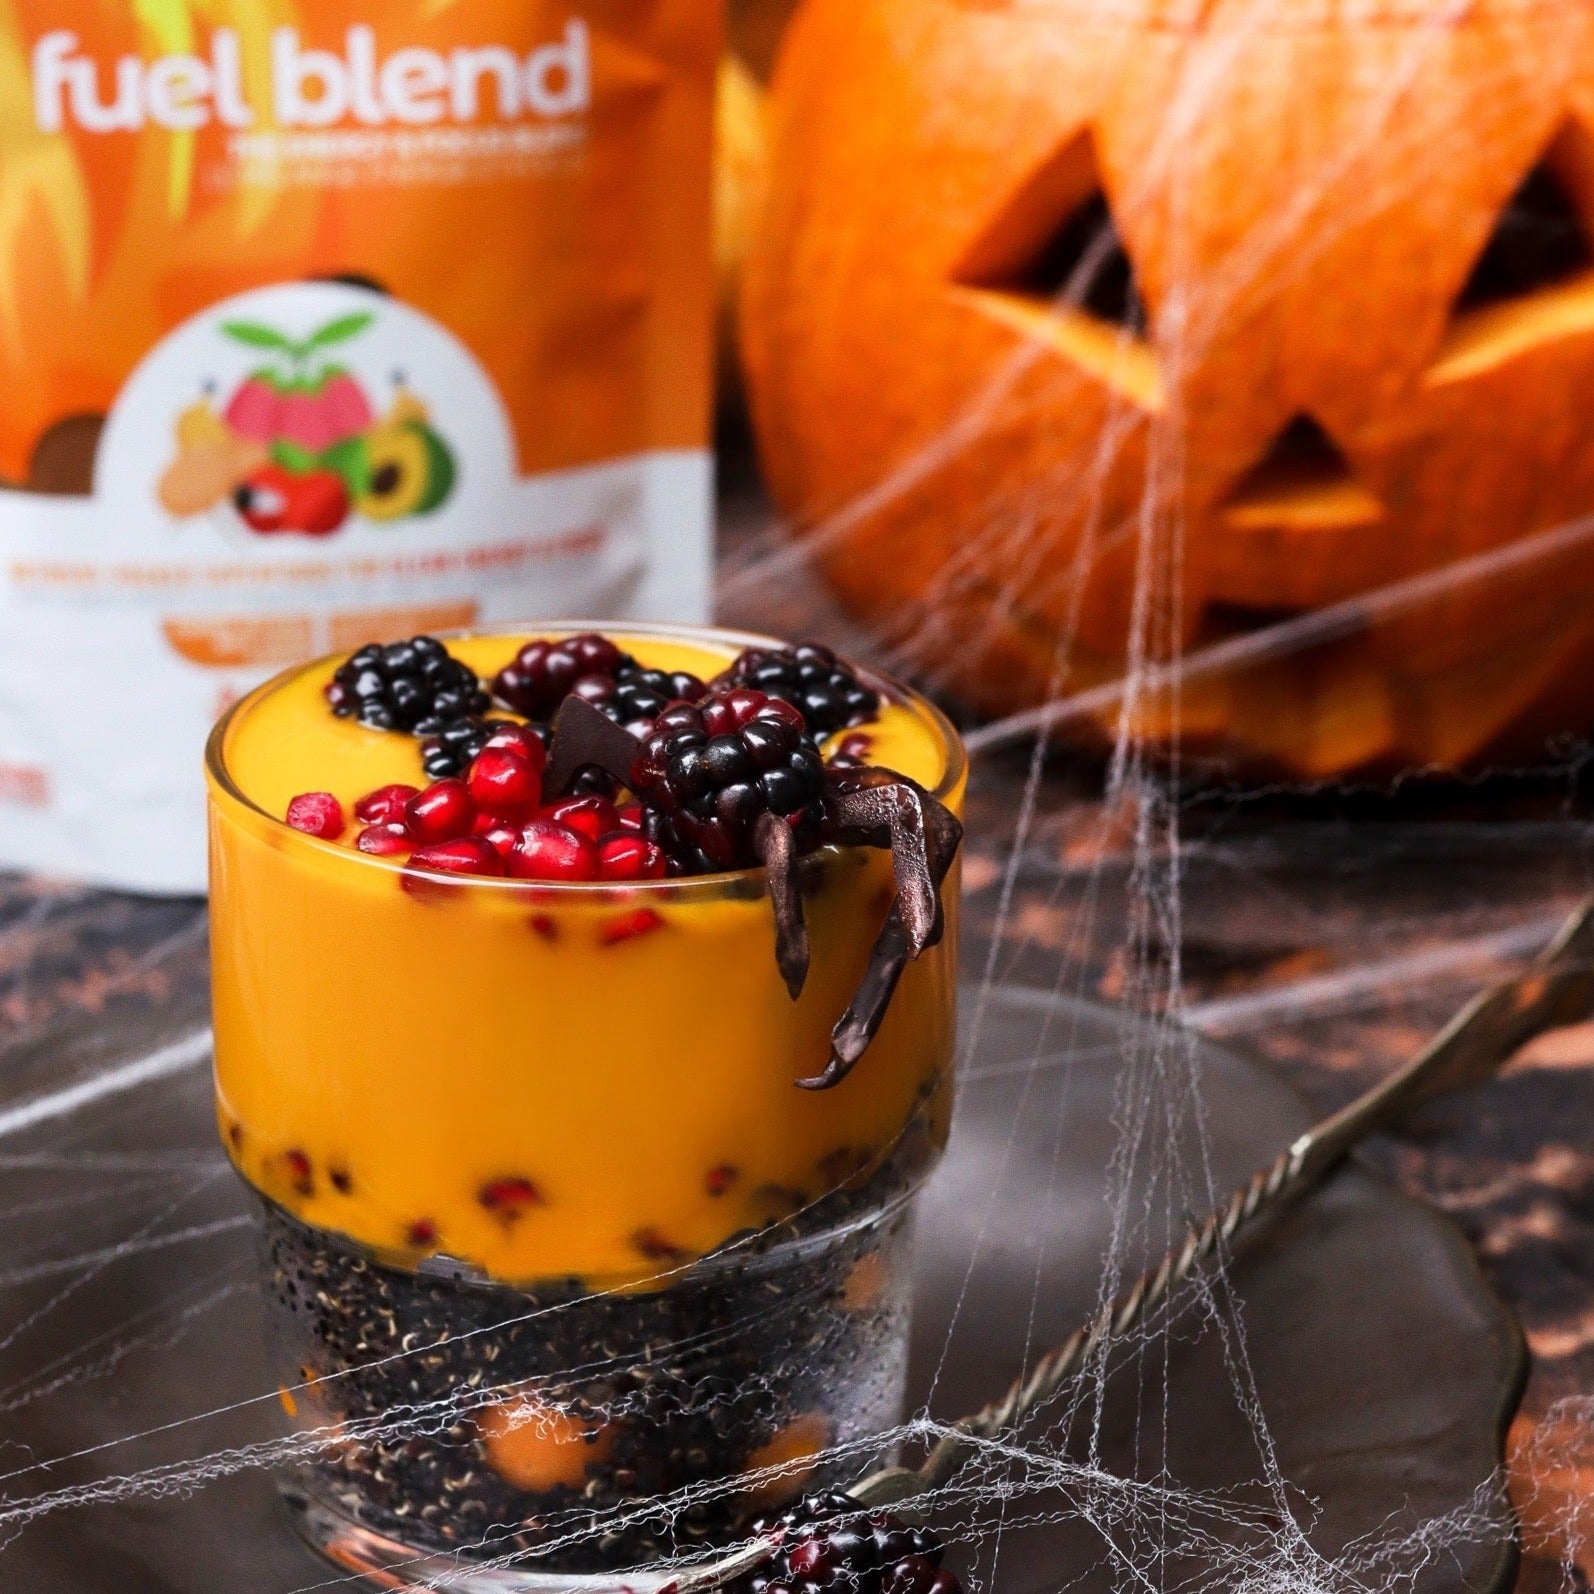 Halloween dessert made using smoov superfood blends and powders. Packed with antioxidants for health & wellness. Keto Friendly